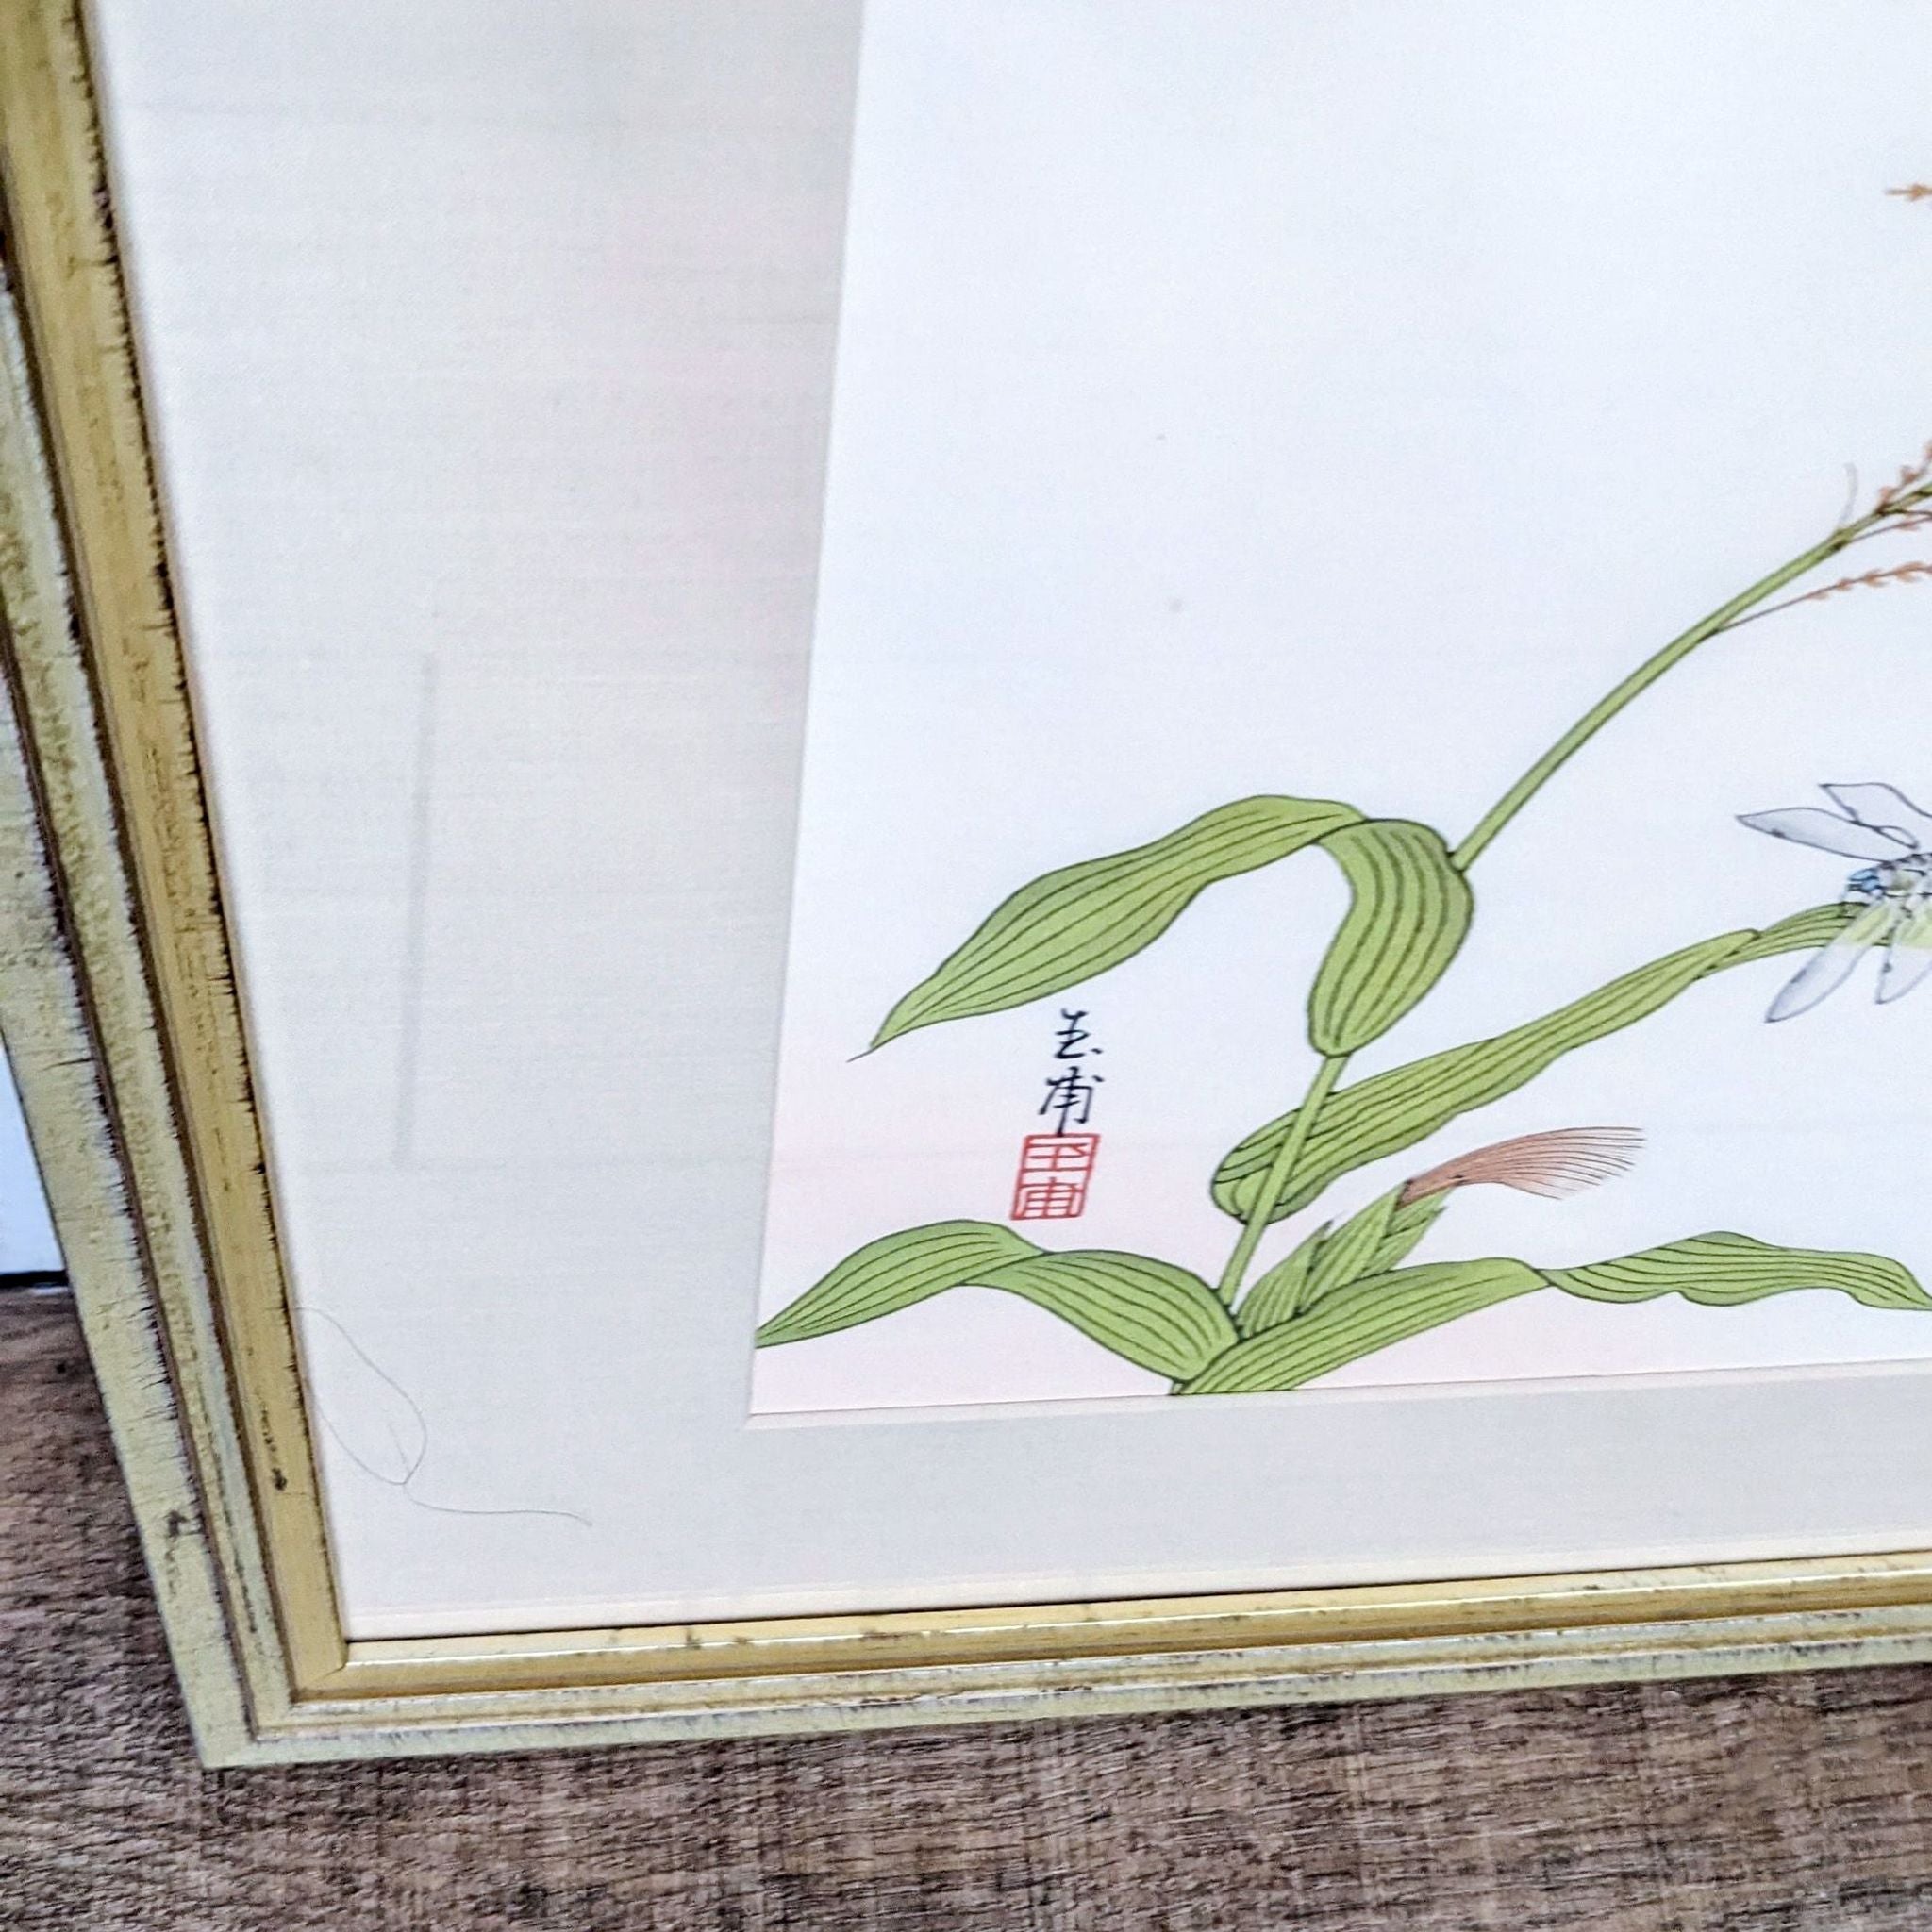 Botanical print with delicate leaves and dragonfly against Asian calligraphy, framed in gold by Reperch.